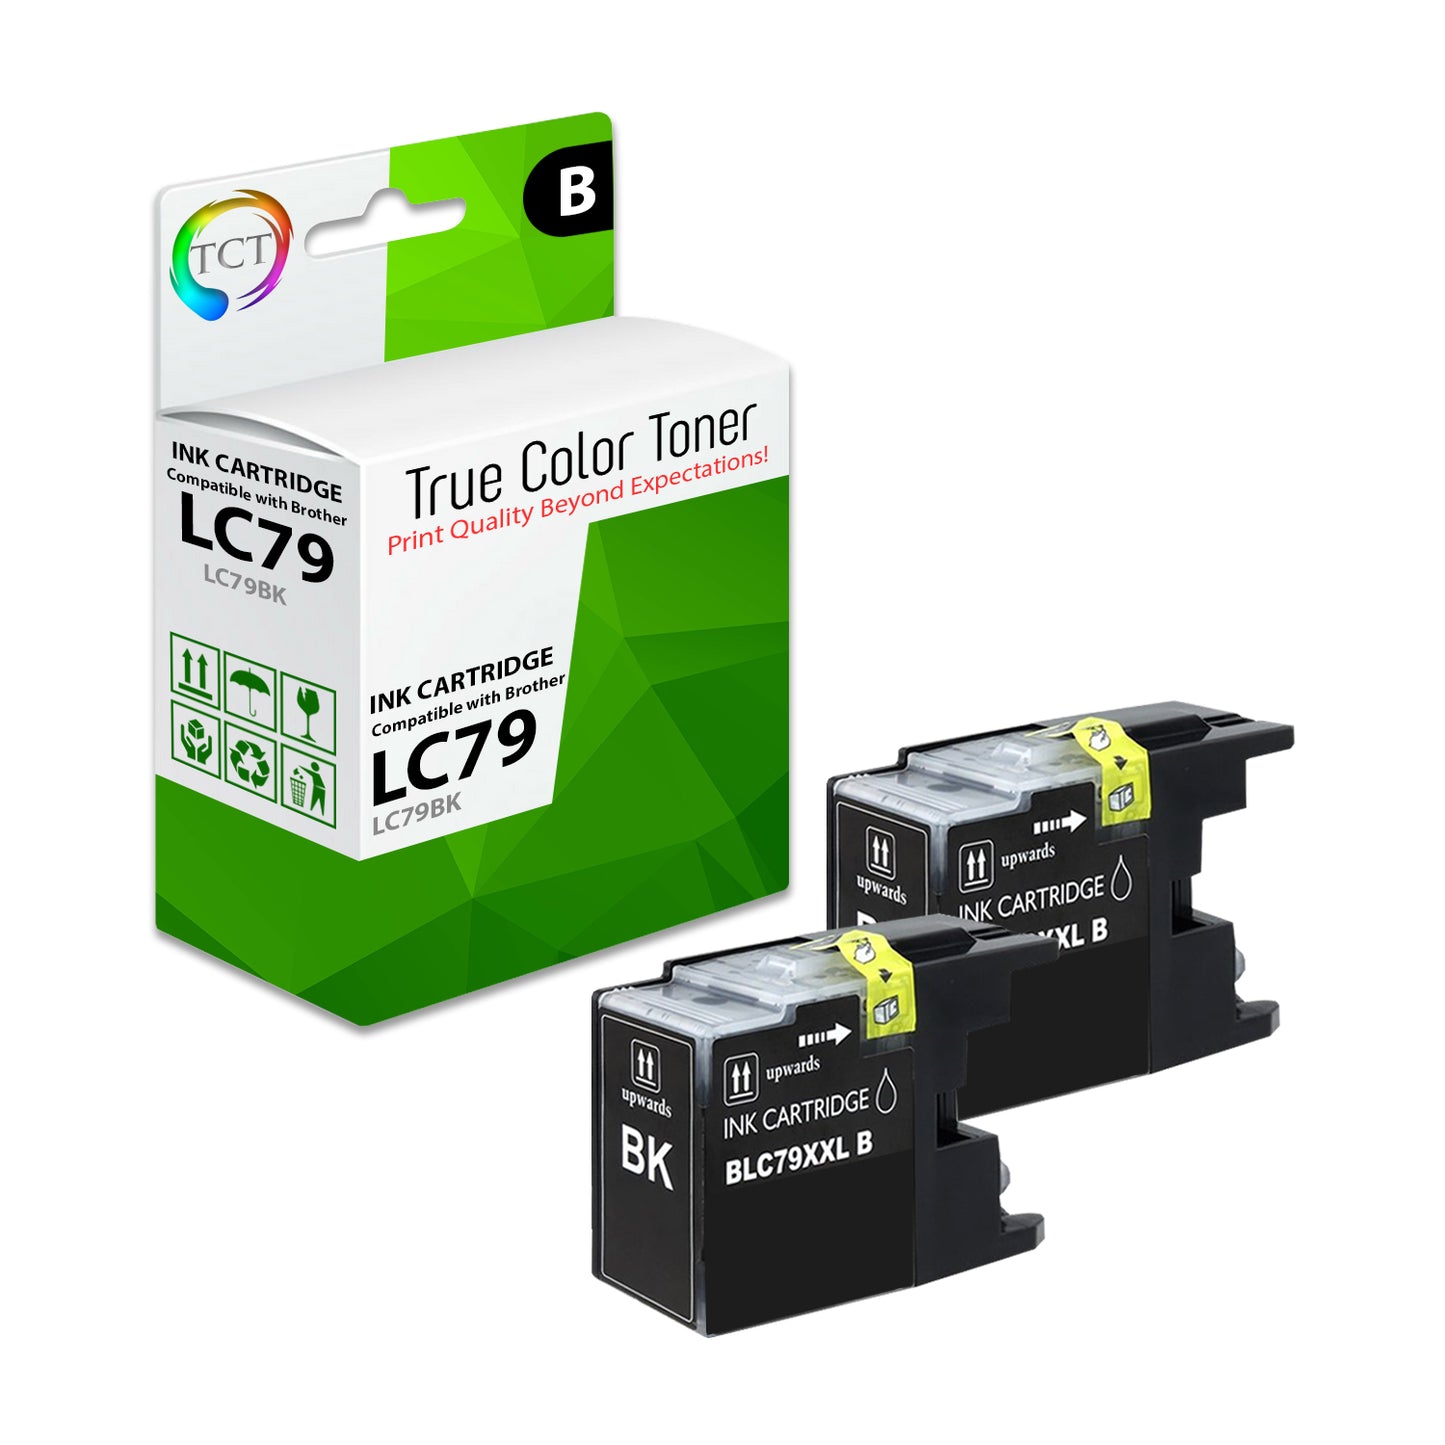 TCT Compatible Super HY Ink Cartridge Replacement for the Brother LC79 Series - 2 Pack Black